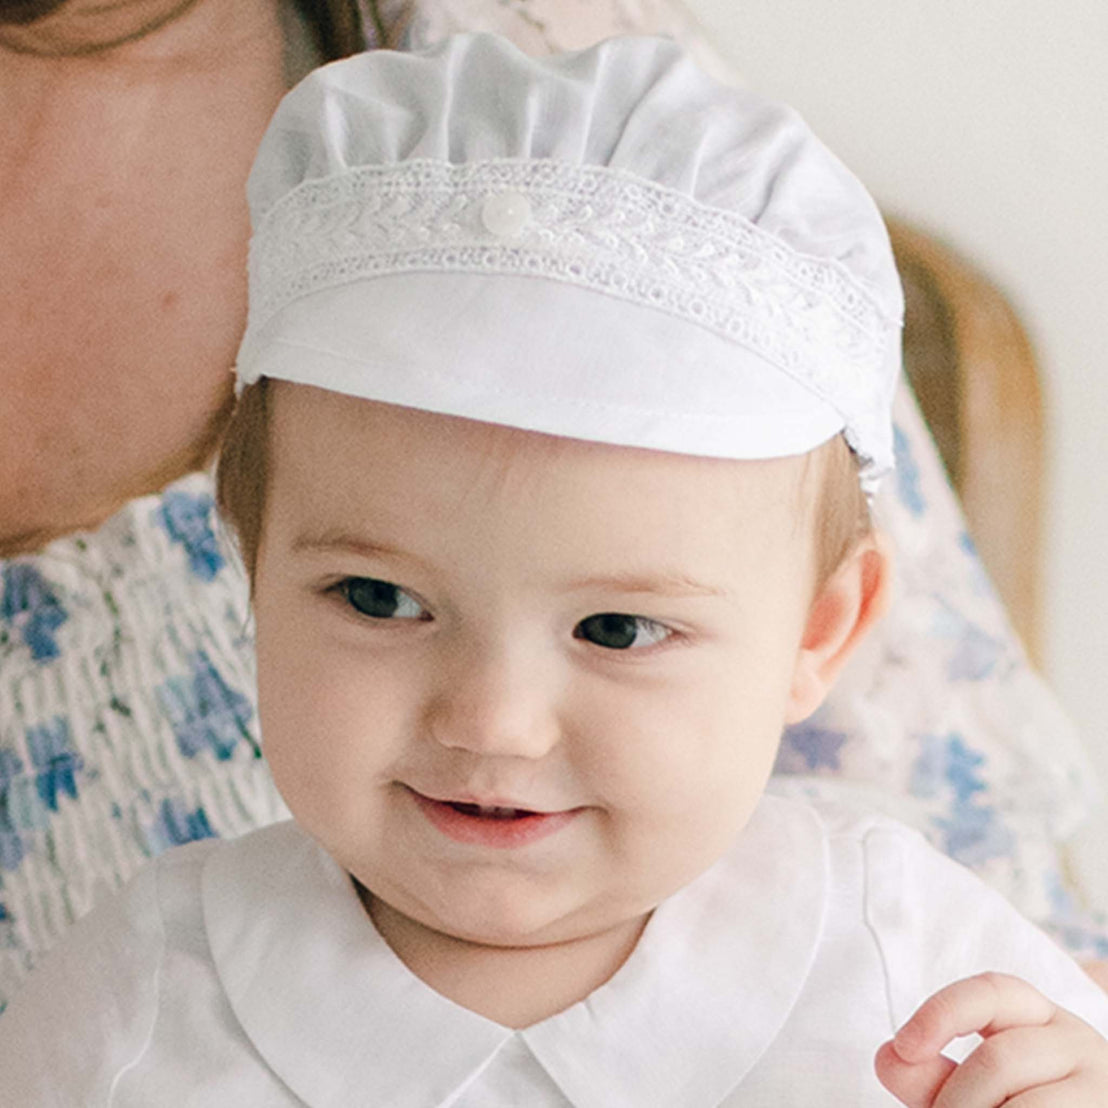 A smiling baby wearing an Oliver Linen Cap and a matching outfit with Venice lace details shines brilliantly. The baby is cradled by someone dressed in a floral-patterned blouse, adding to the heartwarming scene.